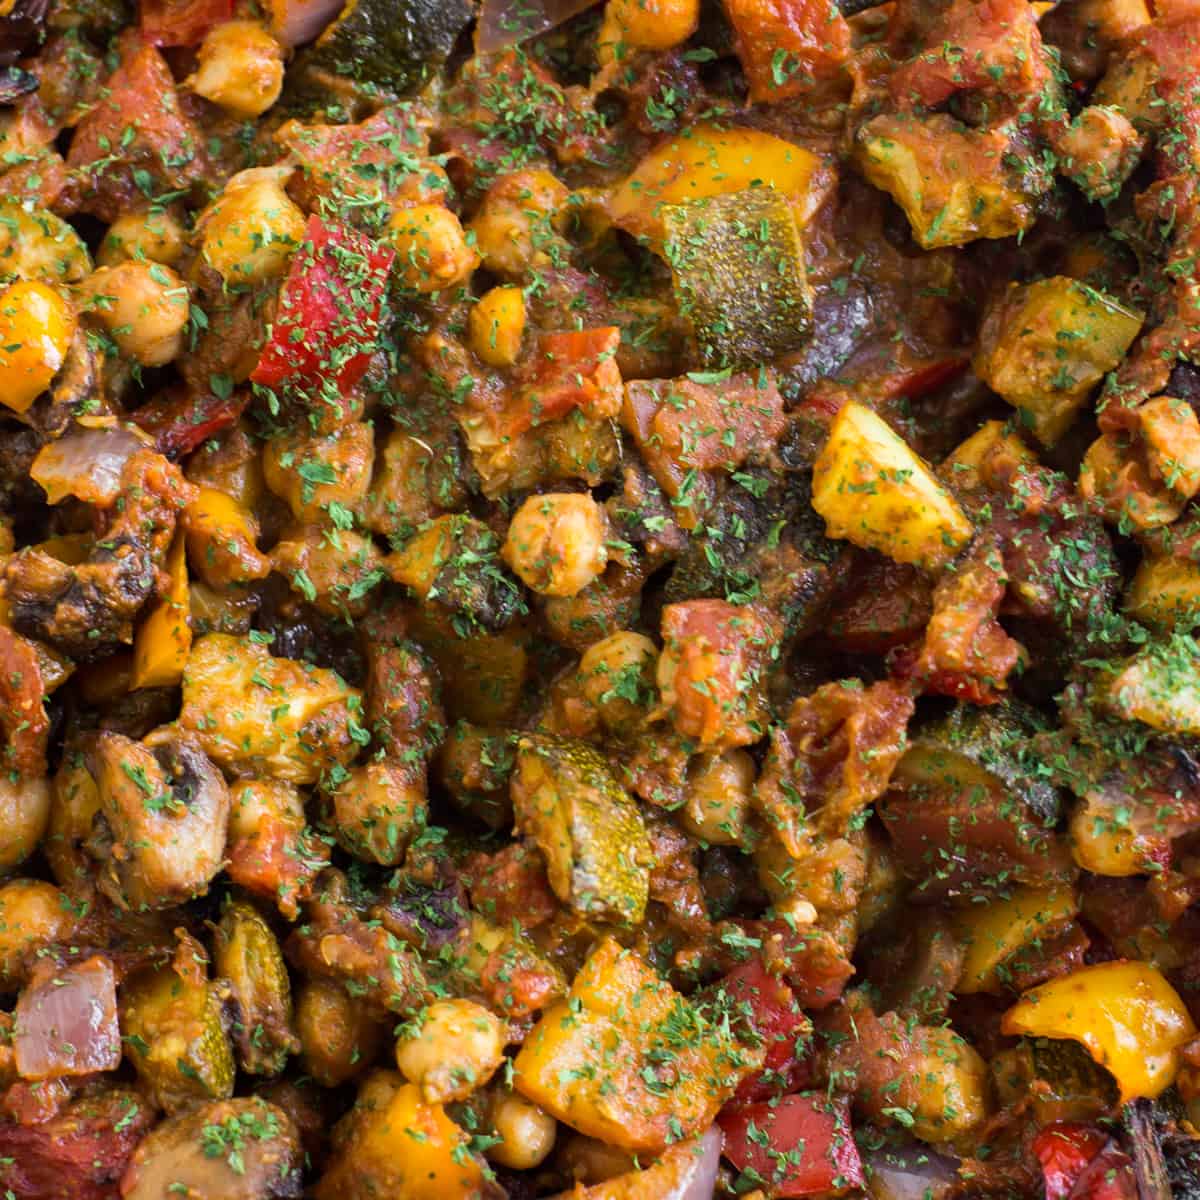 Extreme close-up of roasted vegetable ratatouille with chickpeas